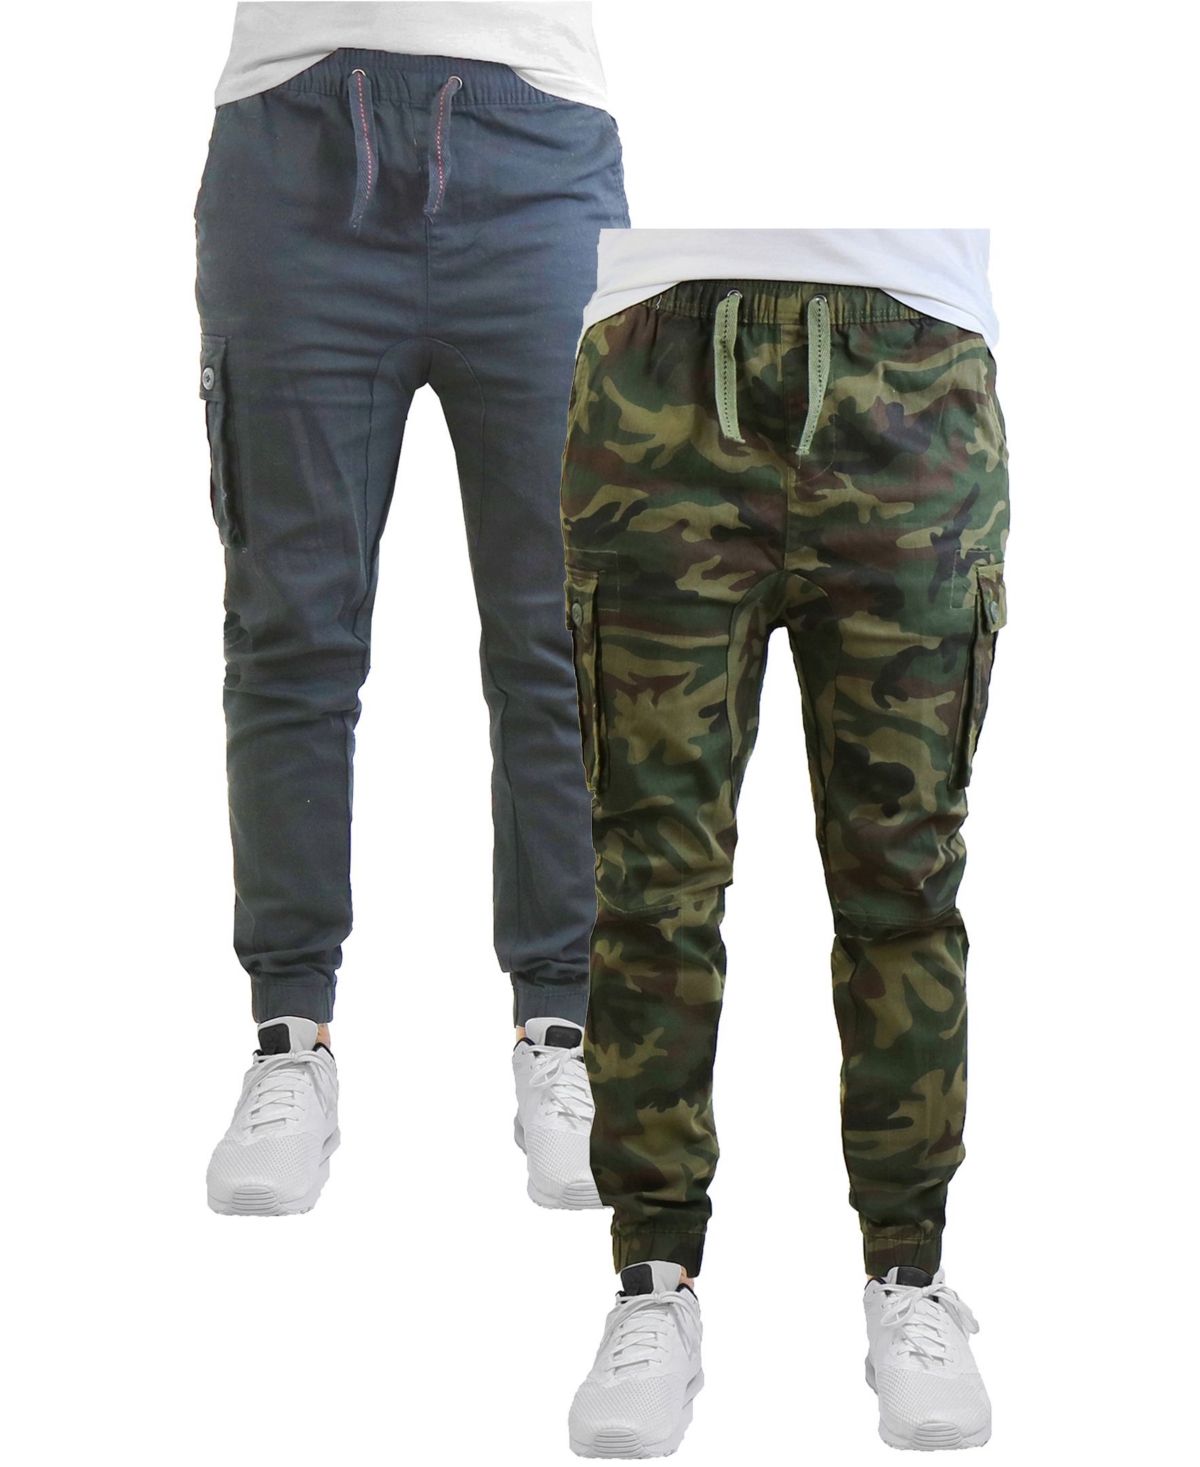 Men's Cotton Stretch Twill Cargo Joggers, Pack of 2 - Navy, Camouflage